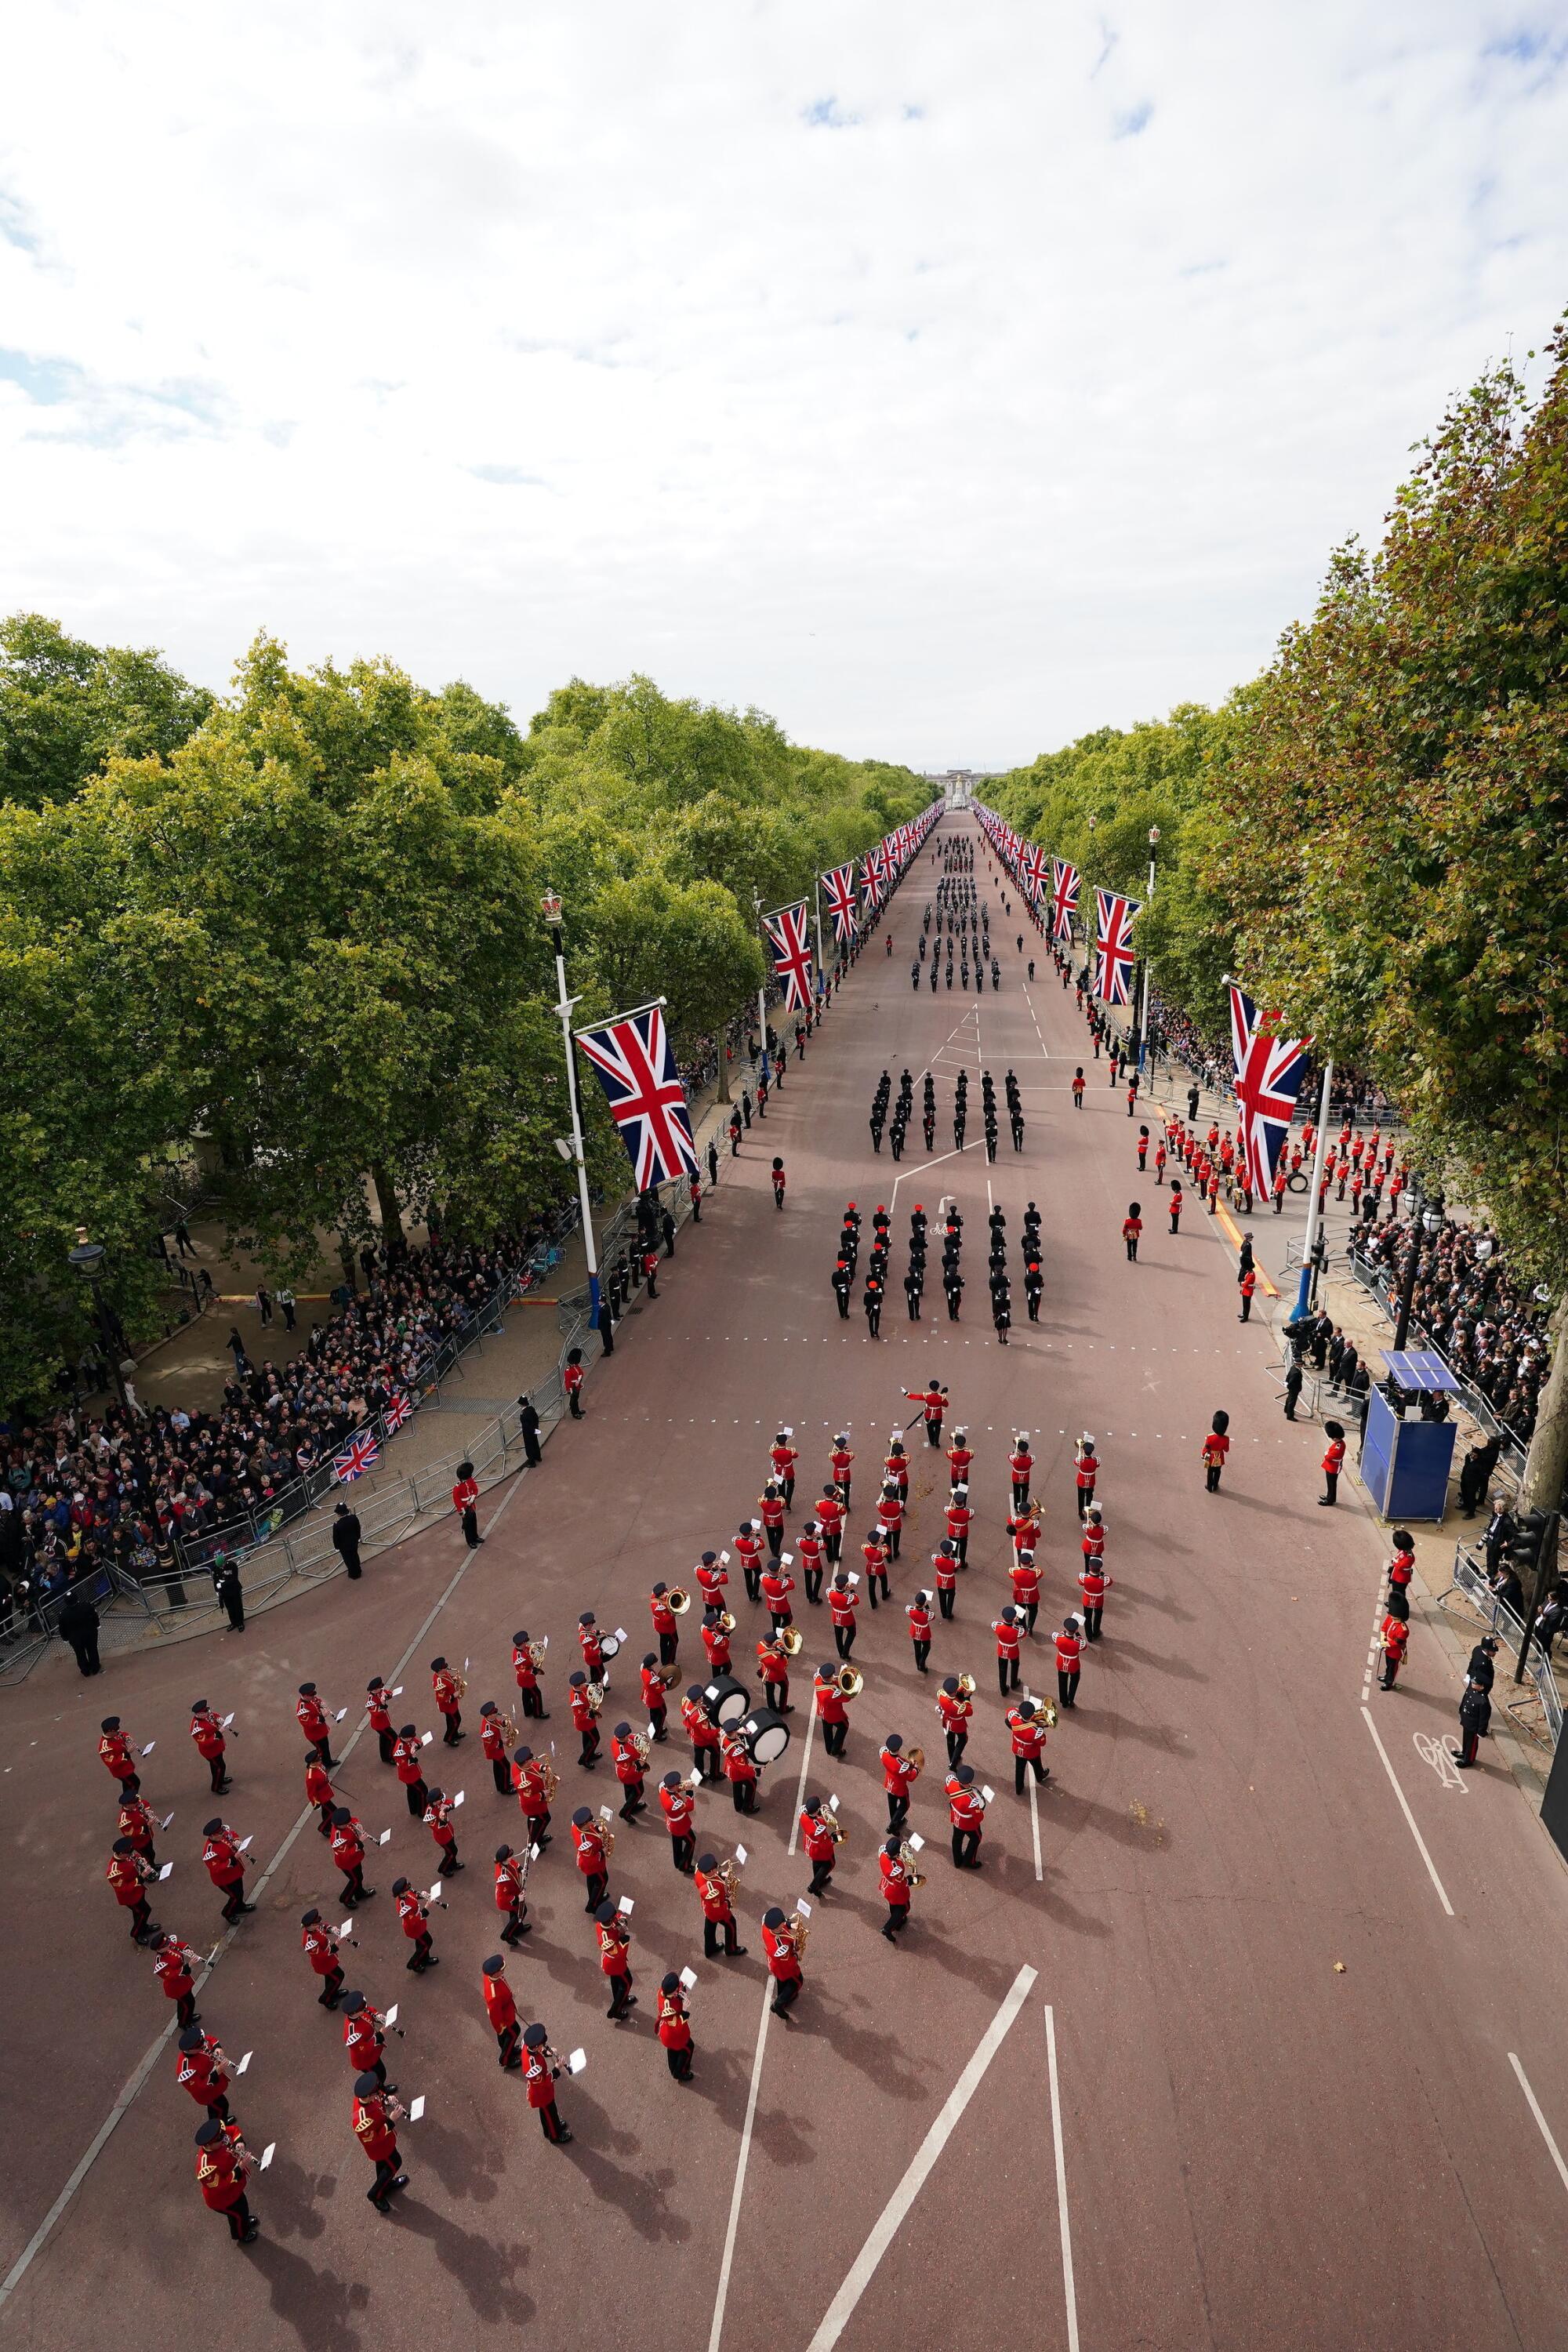 Members of a military marching band march down The Mall in central London on the day of Queen Elizabeth II's funeral.